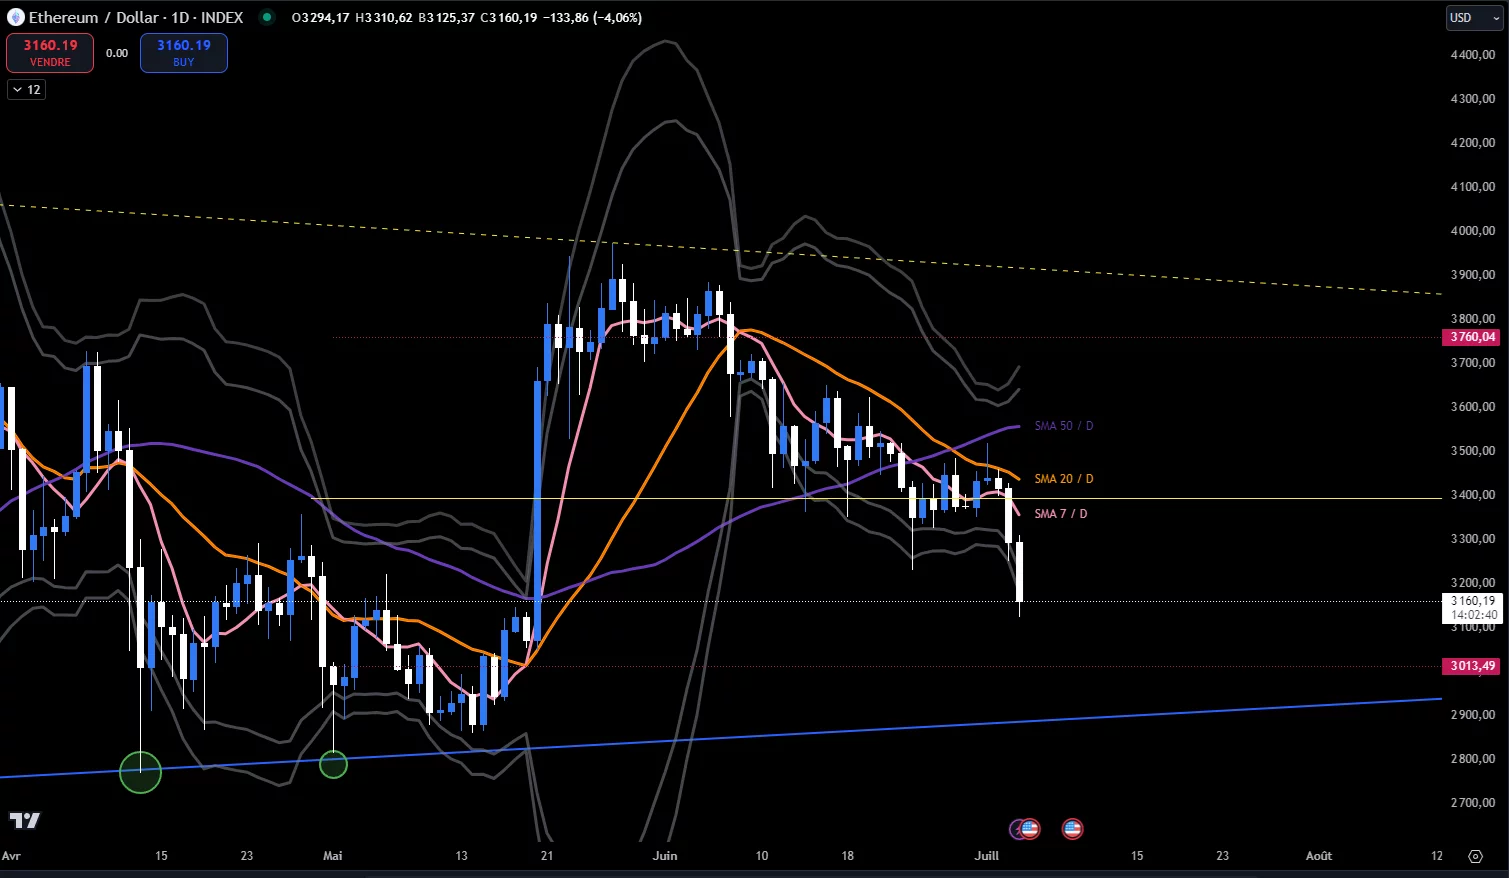 Ethereum Daily